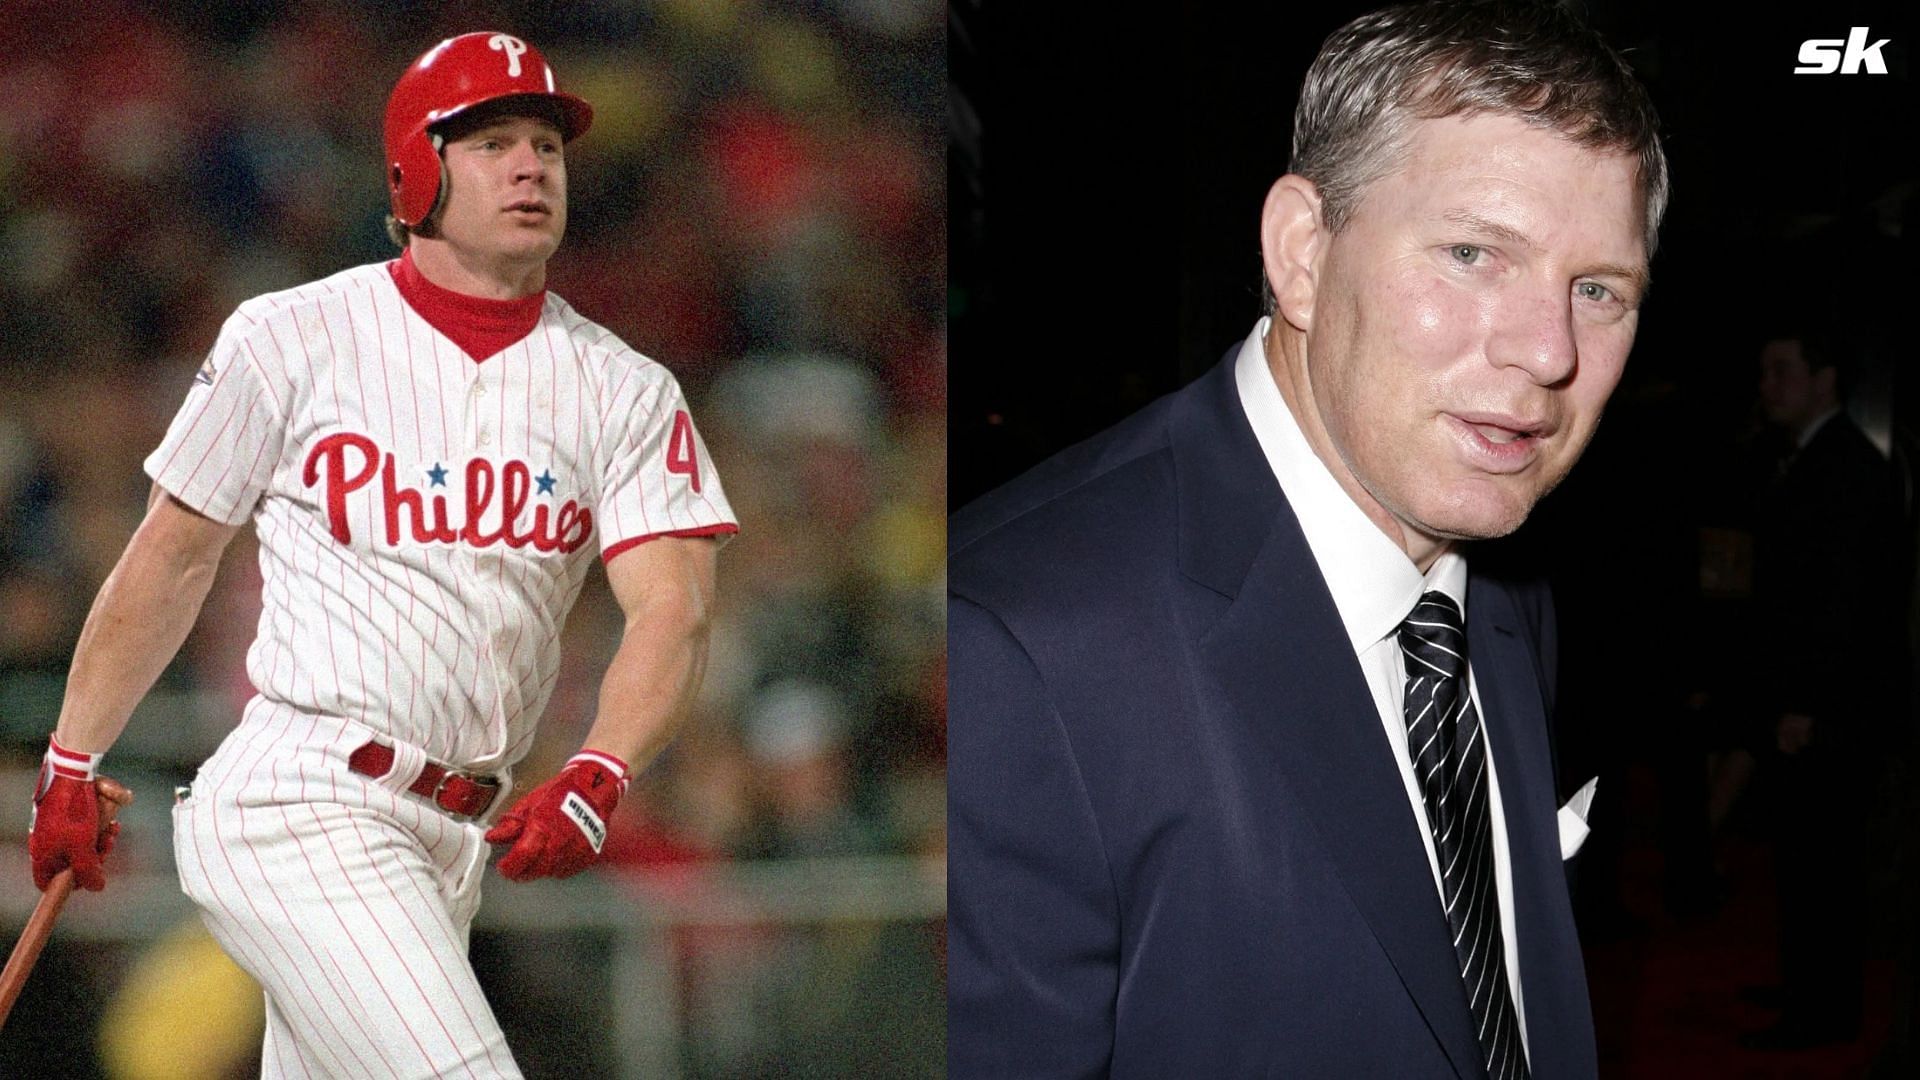 Ron Darling: Court's opinion on MLB Legend Lenny Dykstra in 2020